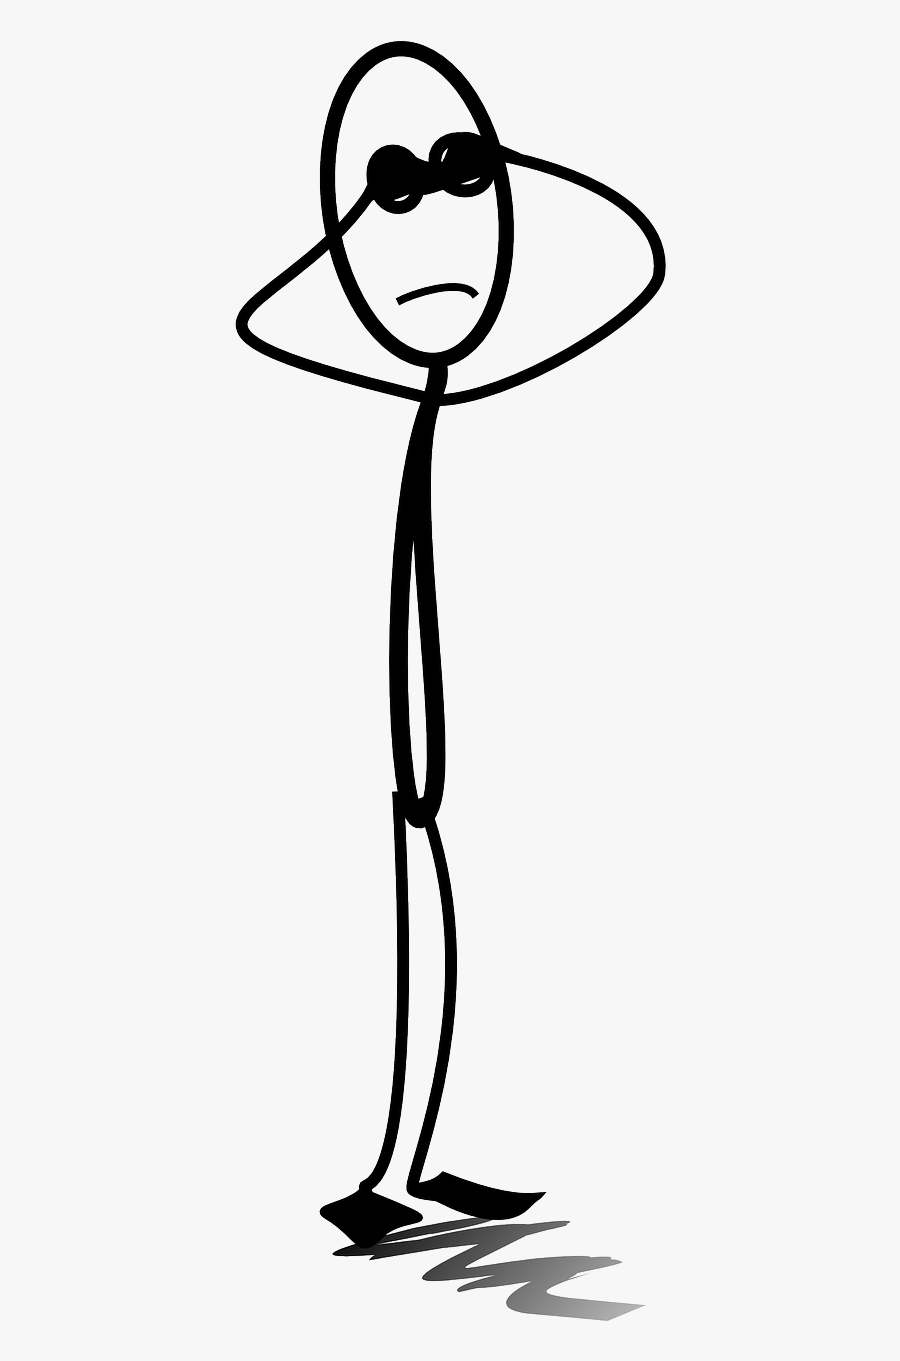 Cry Looking Stickman Png Image - Stick Figure Looking, Transparent Clipart